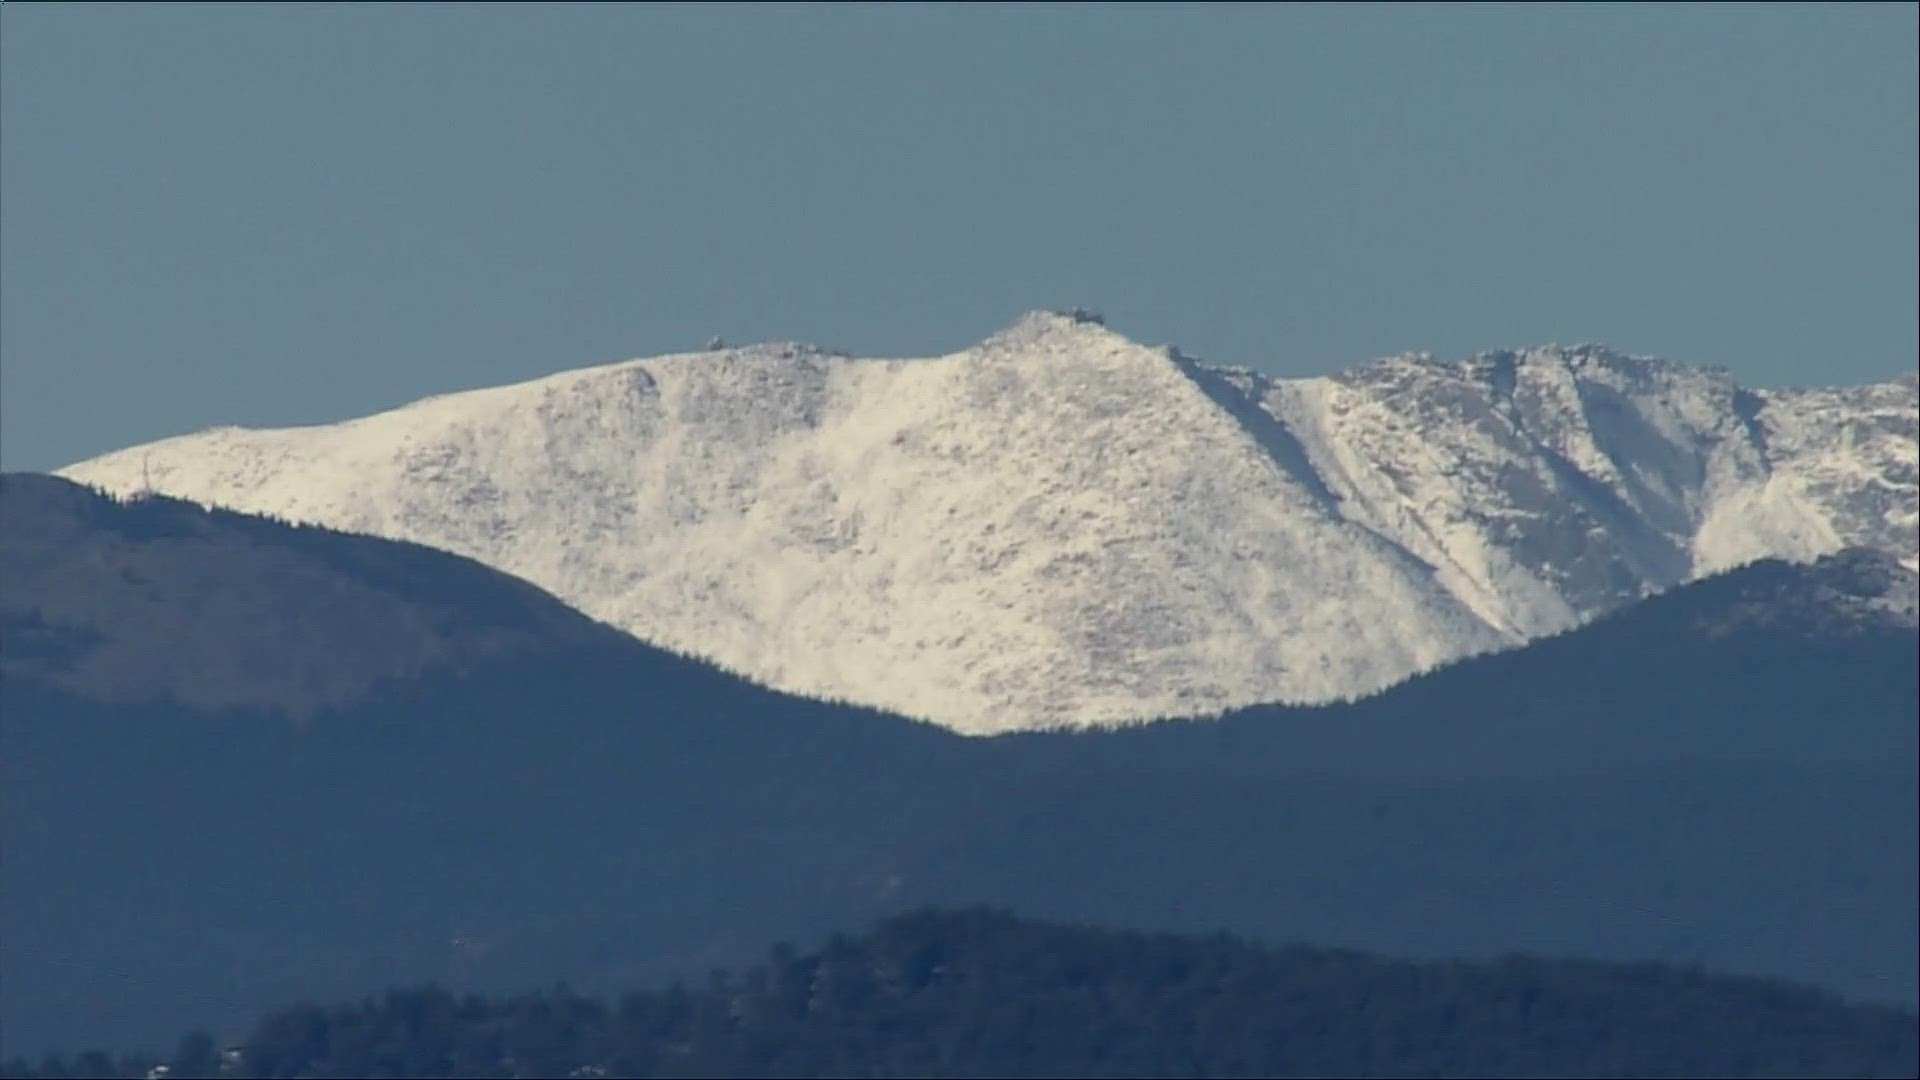 There is still snow showing from Friday's storm on some of the peaks to the west of Denver, including the newly-named "Mount Blue Sky".